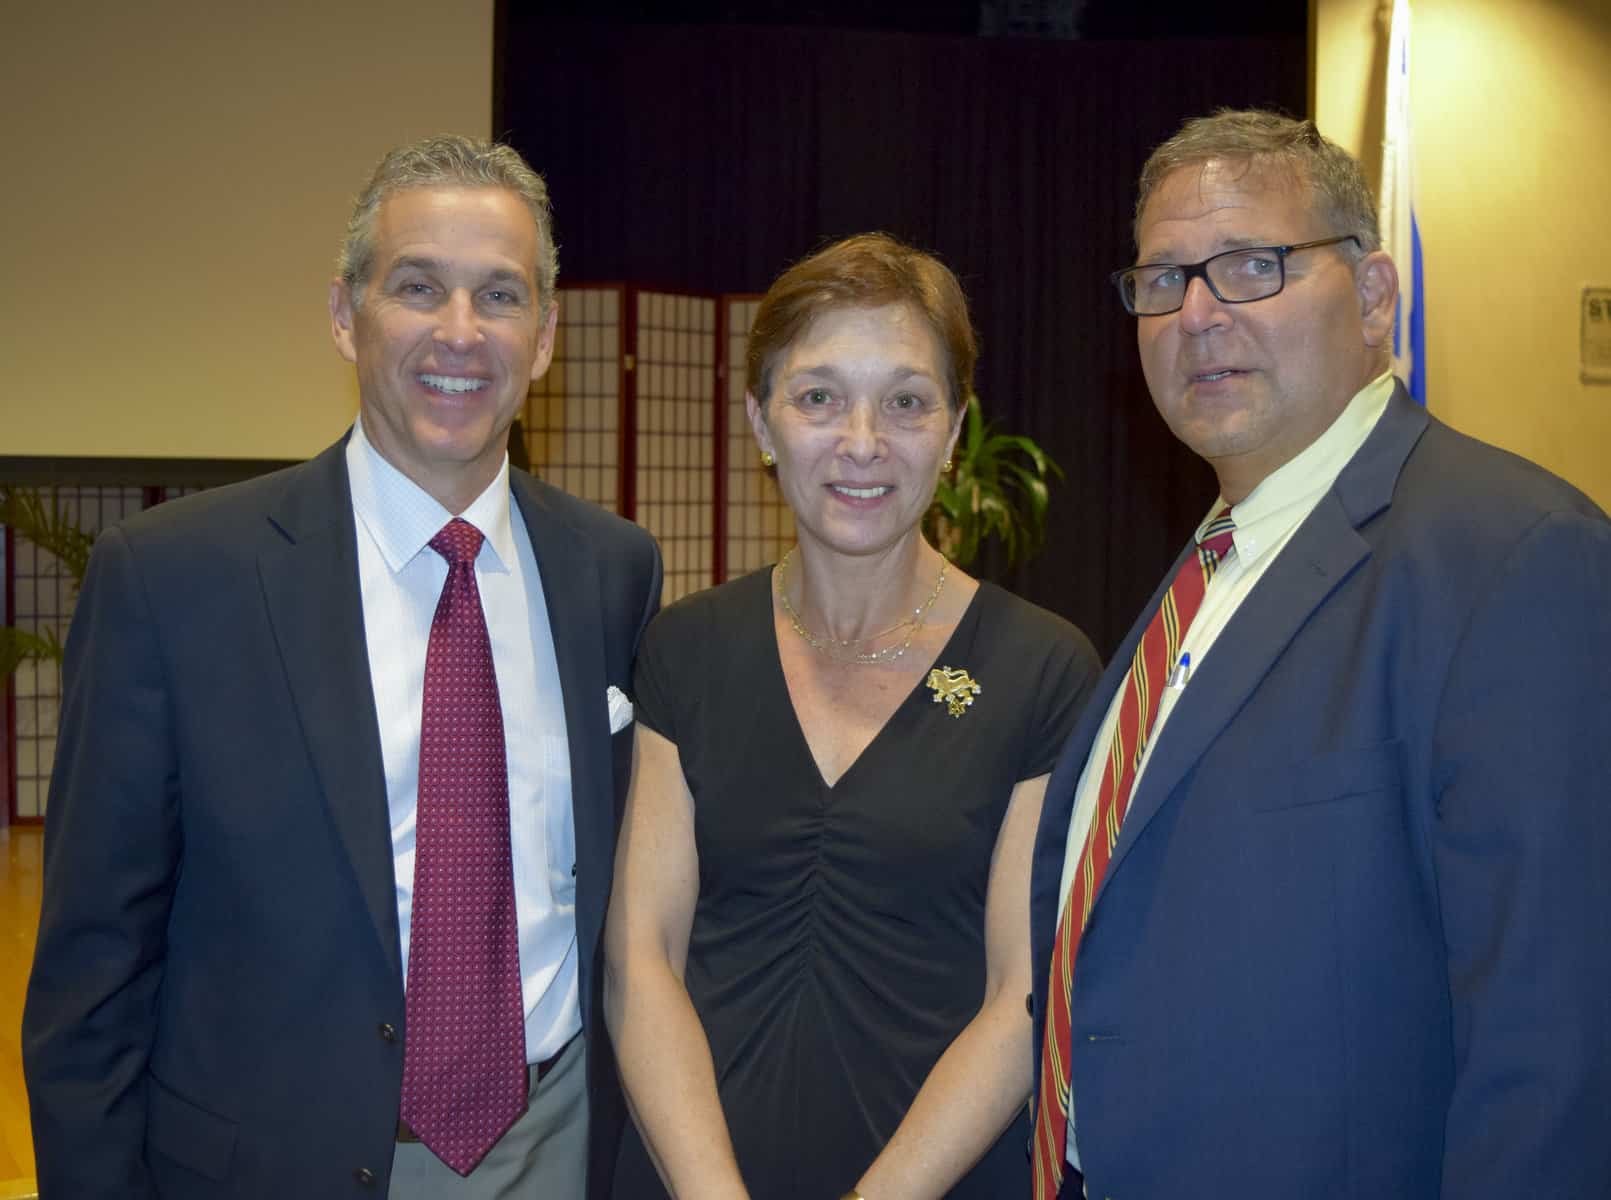 Jay Klebanoof, UJFT president, Karen Jaffe, 2016 Campaign chair and Jerry Silverman, president and CEO, The Jewish Federations of North America.